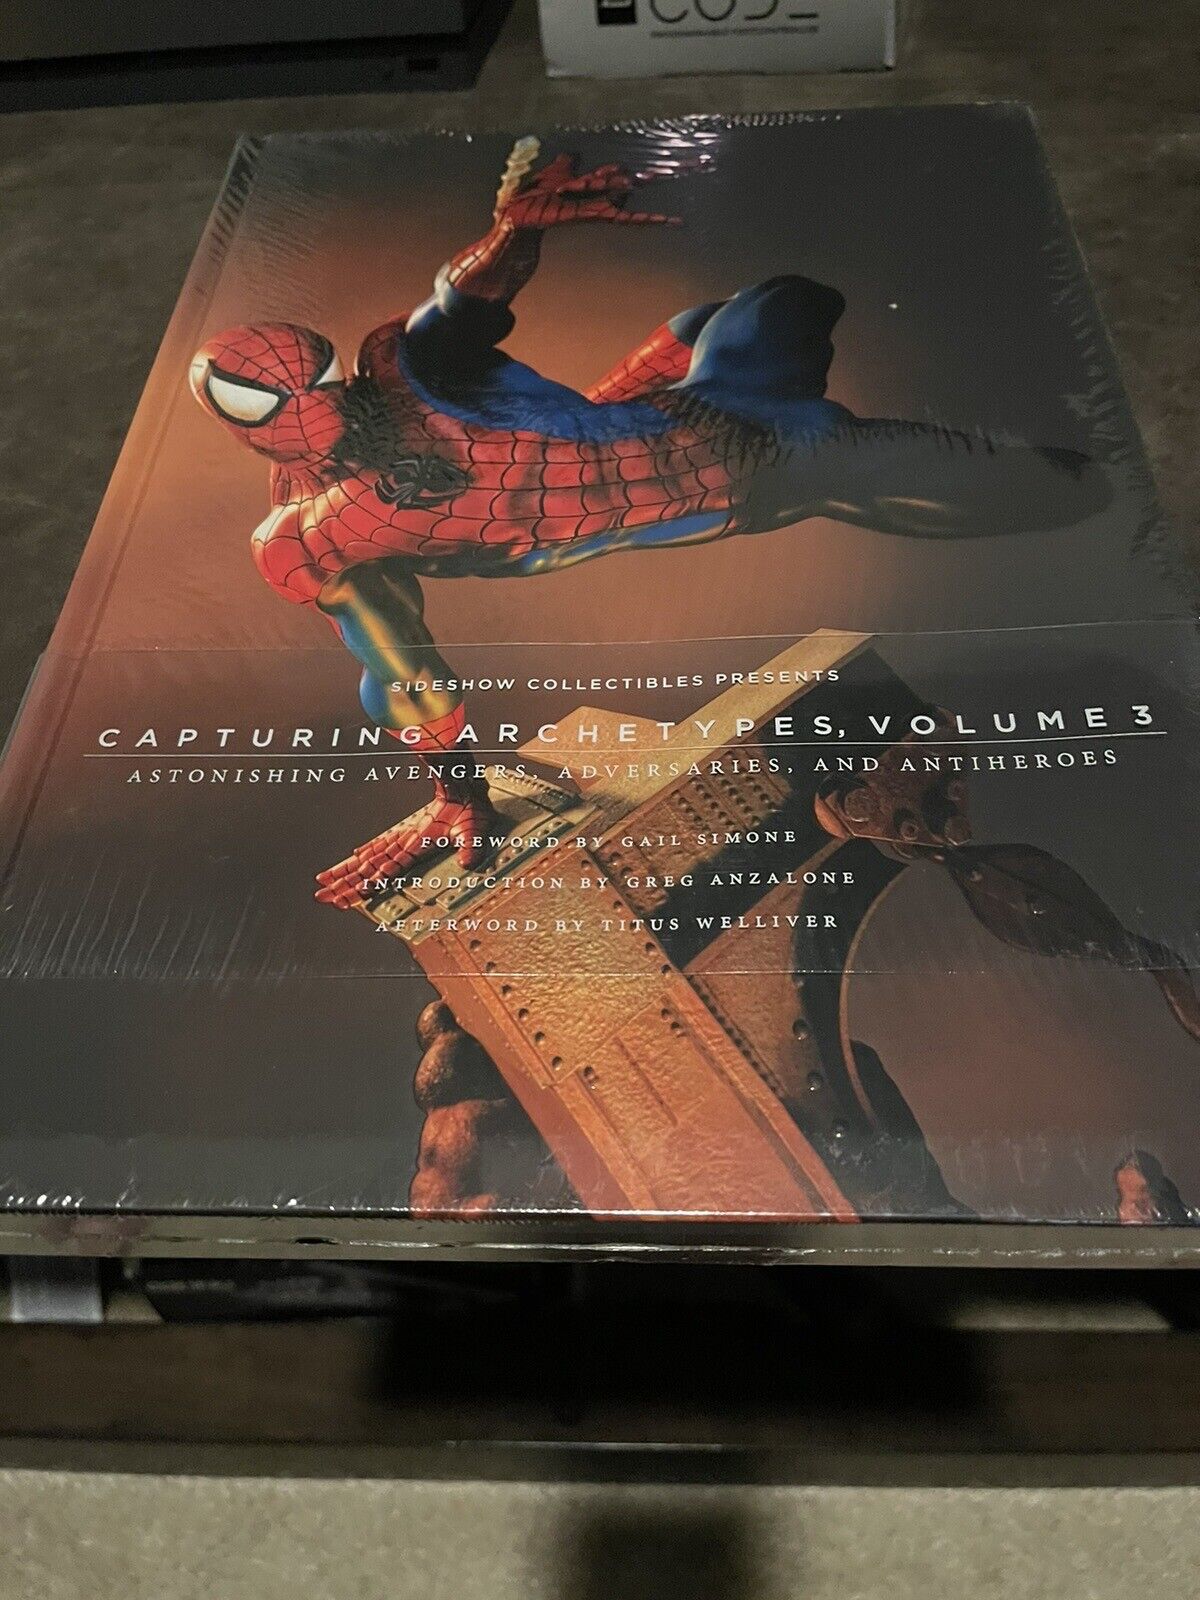 Sideshow Collectibles Capturing Archetypes vol 3 Hardcover NEW Sealed HC